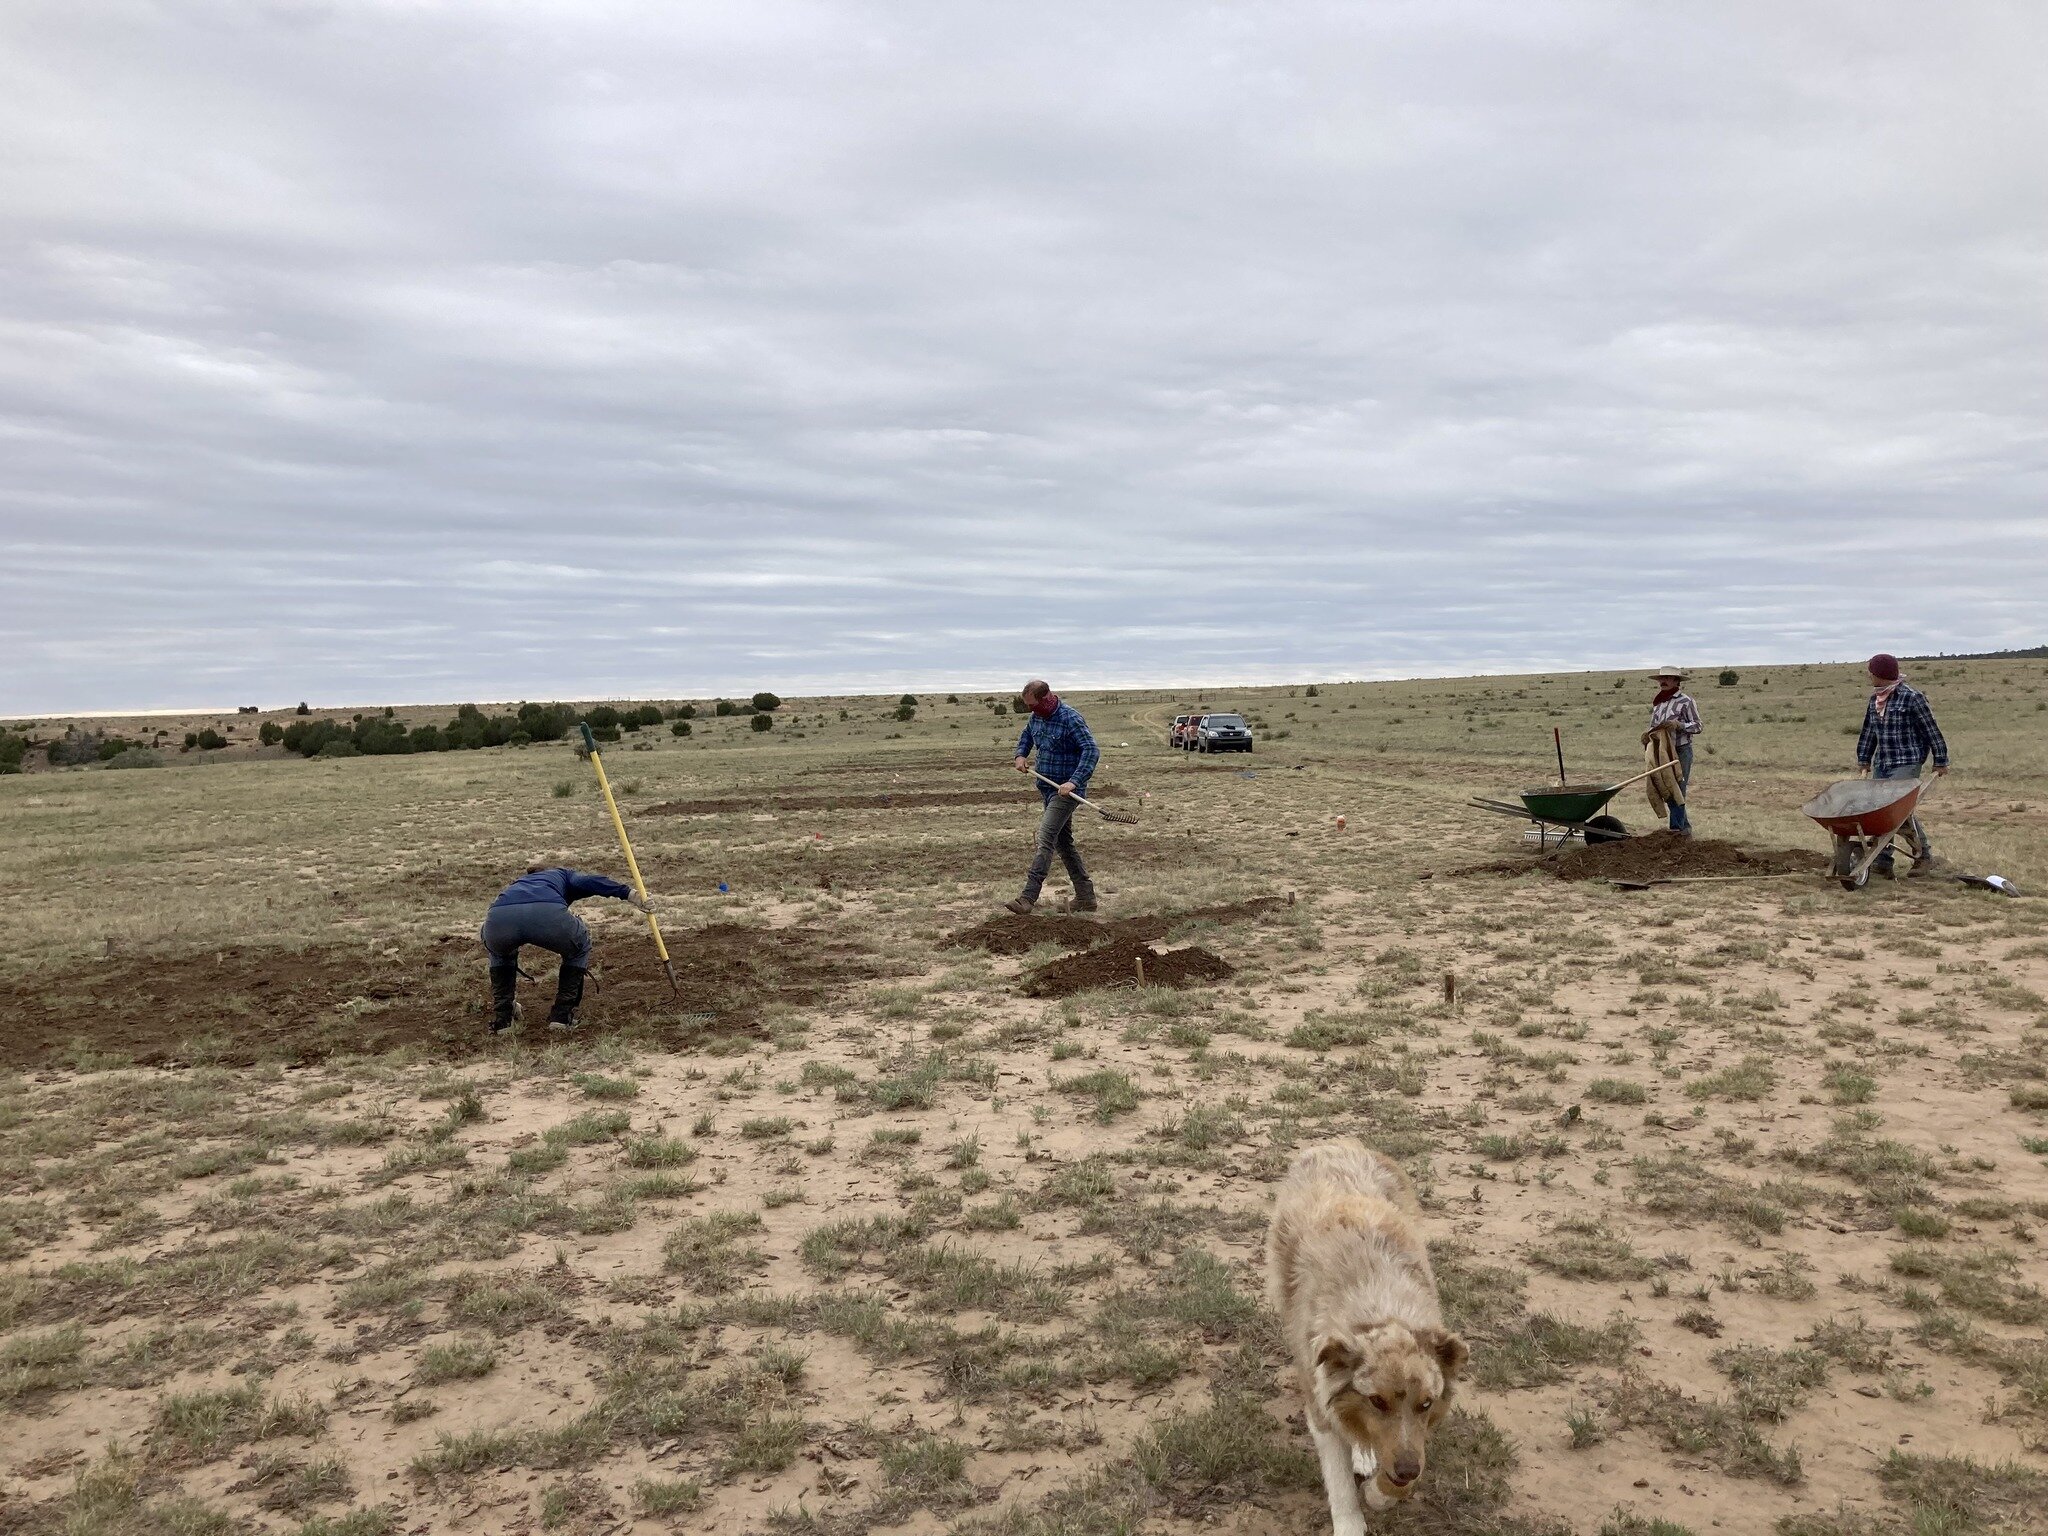 Here's a little something about the compost trials on rangelands we did with the Quivira Coalition and Polk's Folly Farm. I think this soil amendment may have some potential when used as a mean of addressing erosion high in the watershed where lack o